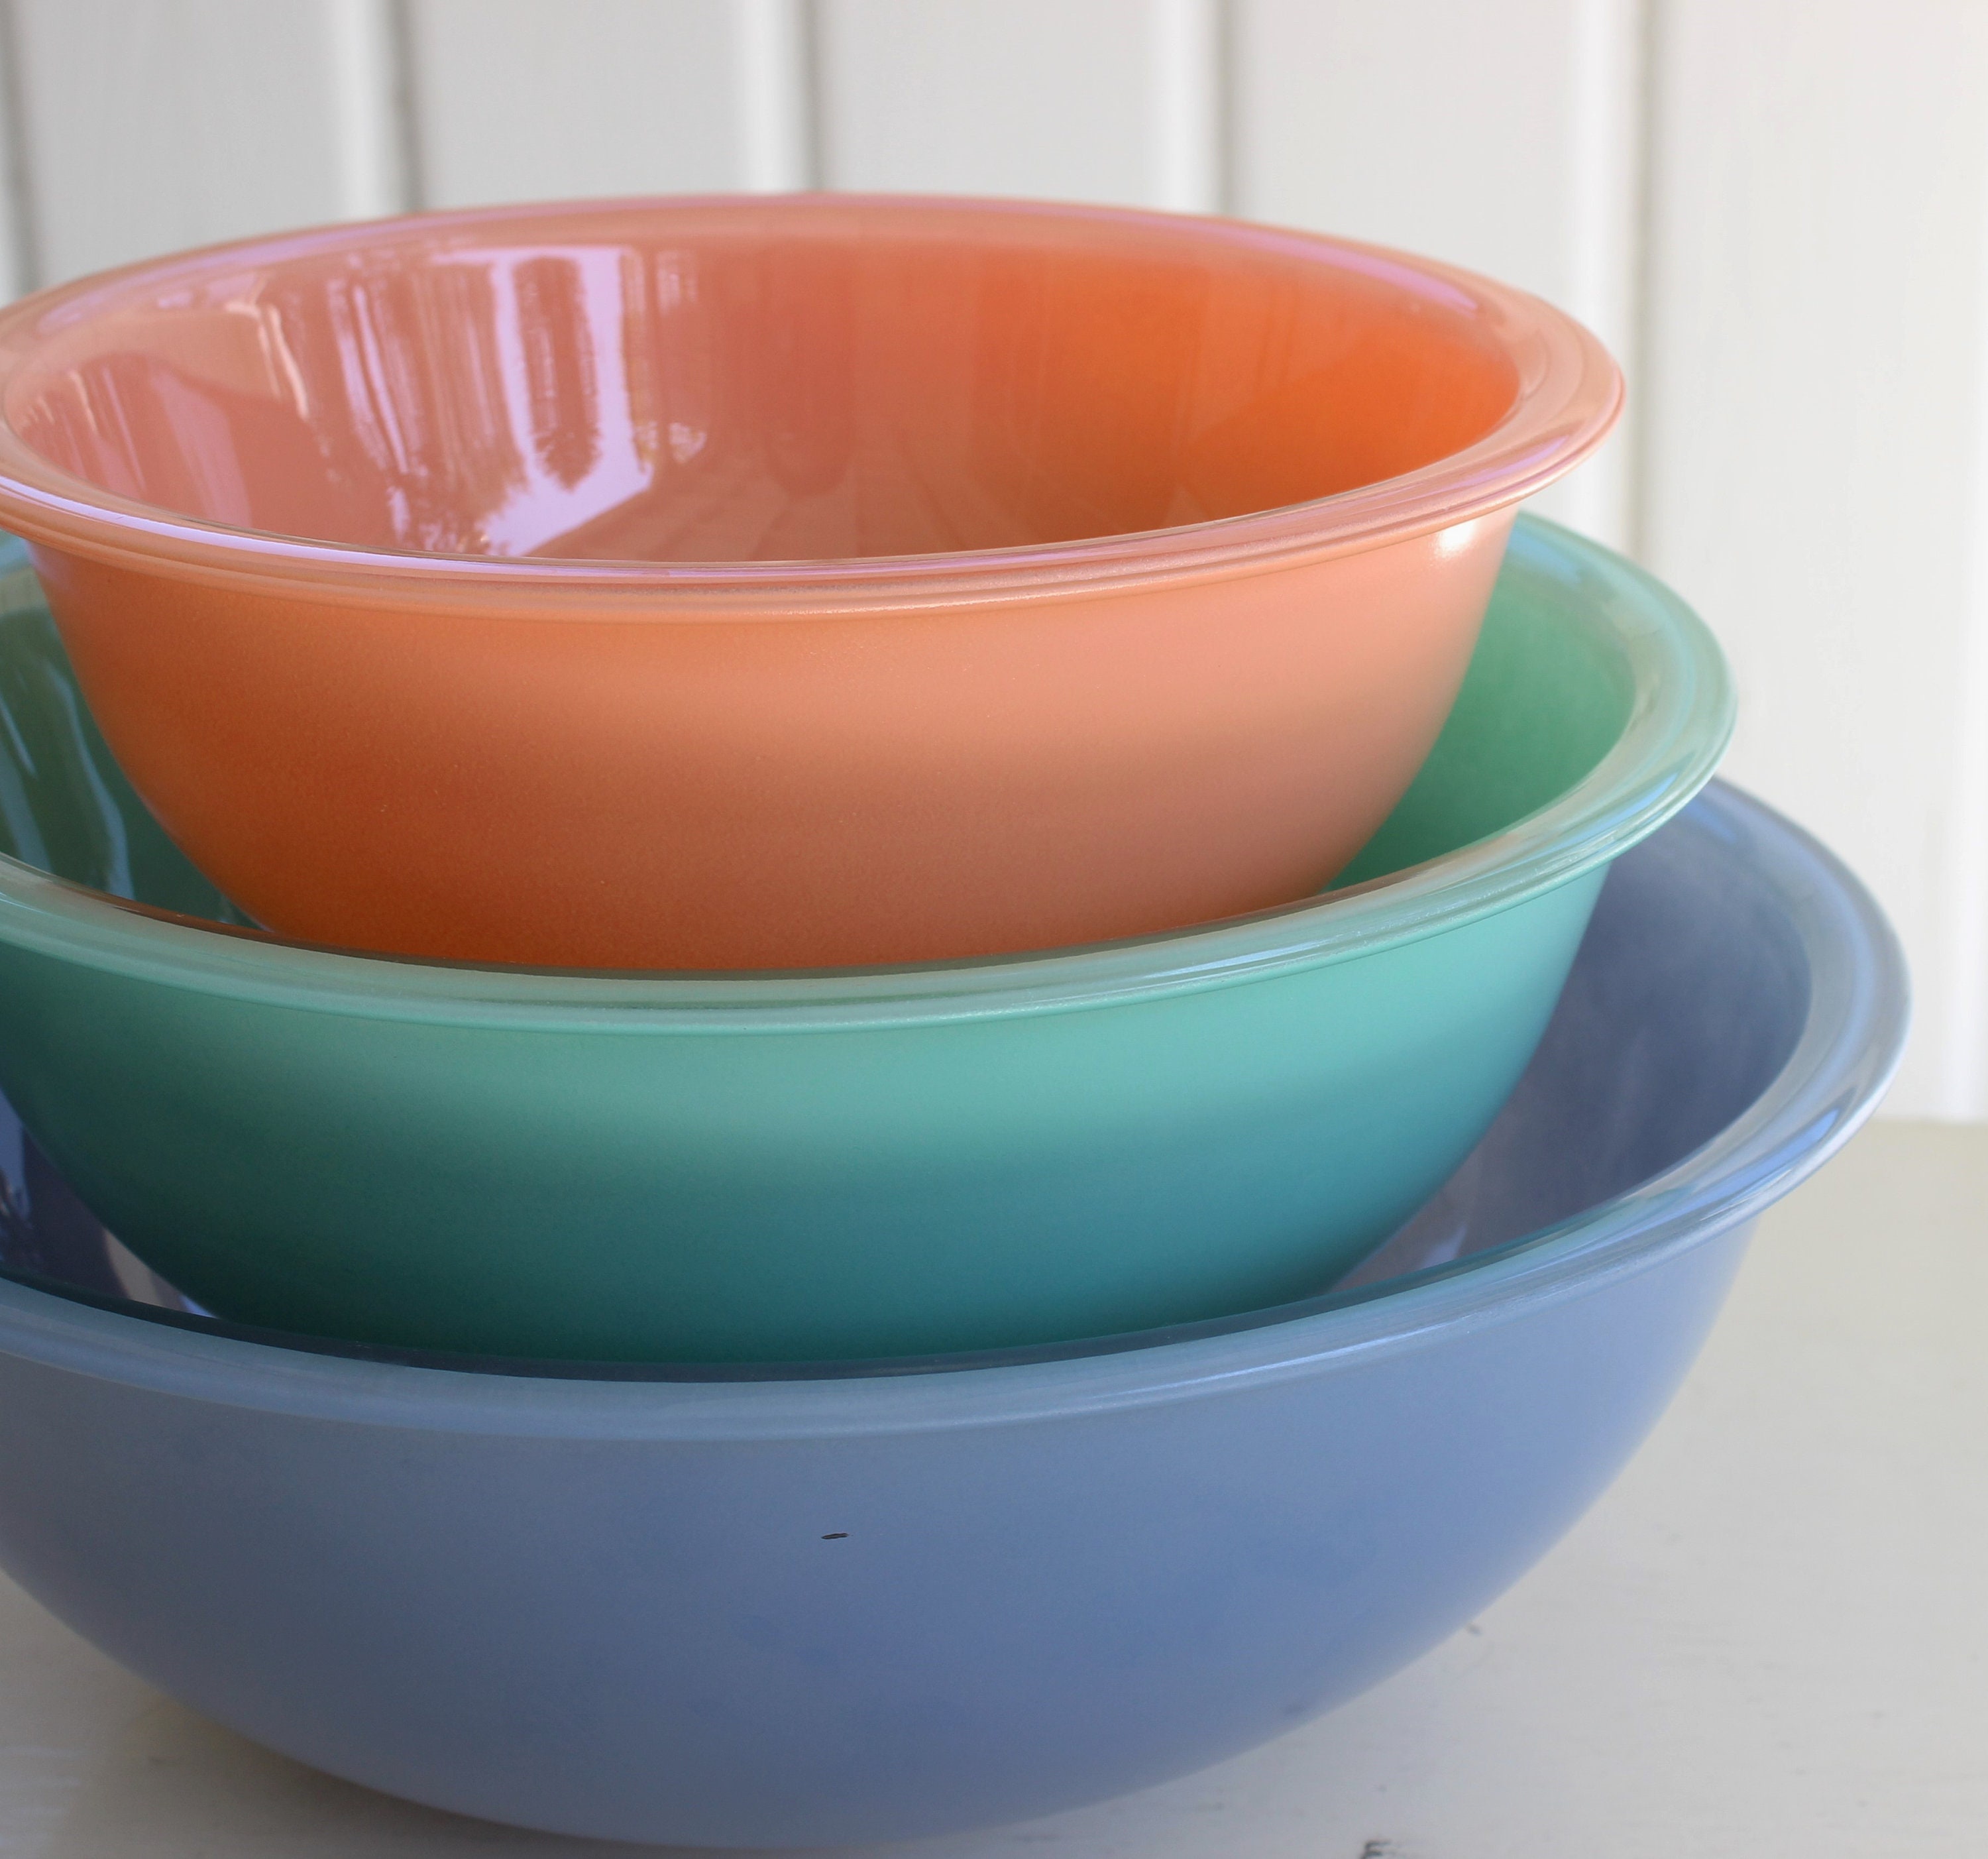 Vintage Pastel Pyrex Mixing Bowls Nesting Bowls Clear Bottom Pink And Blue Set Of 3